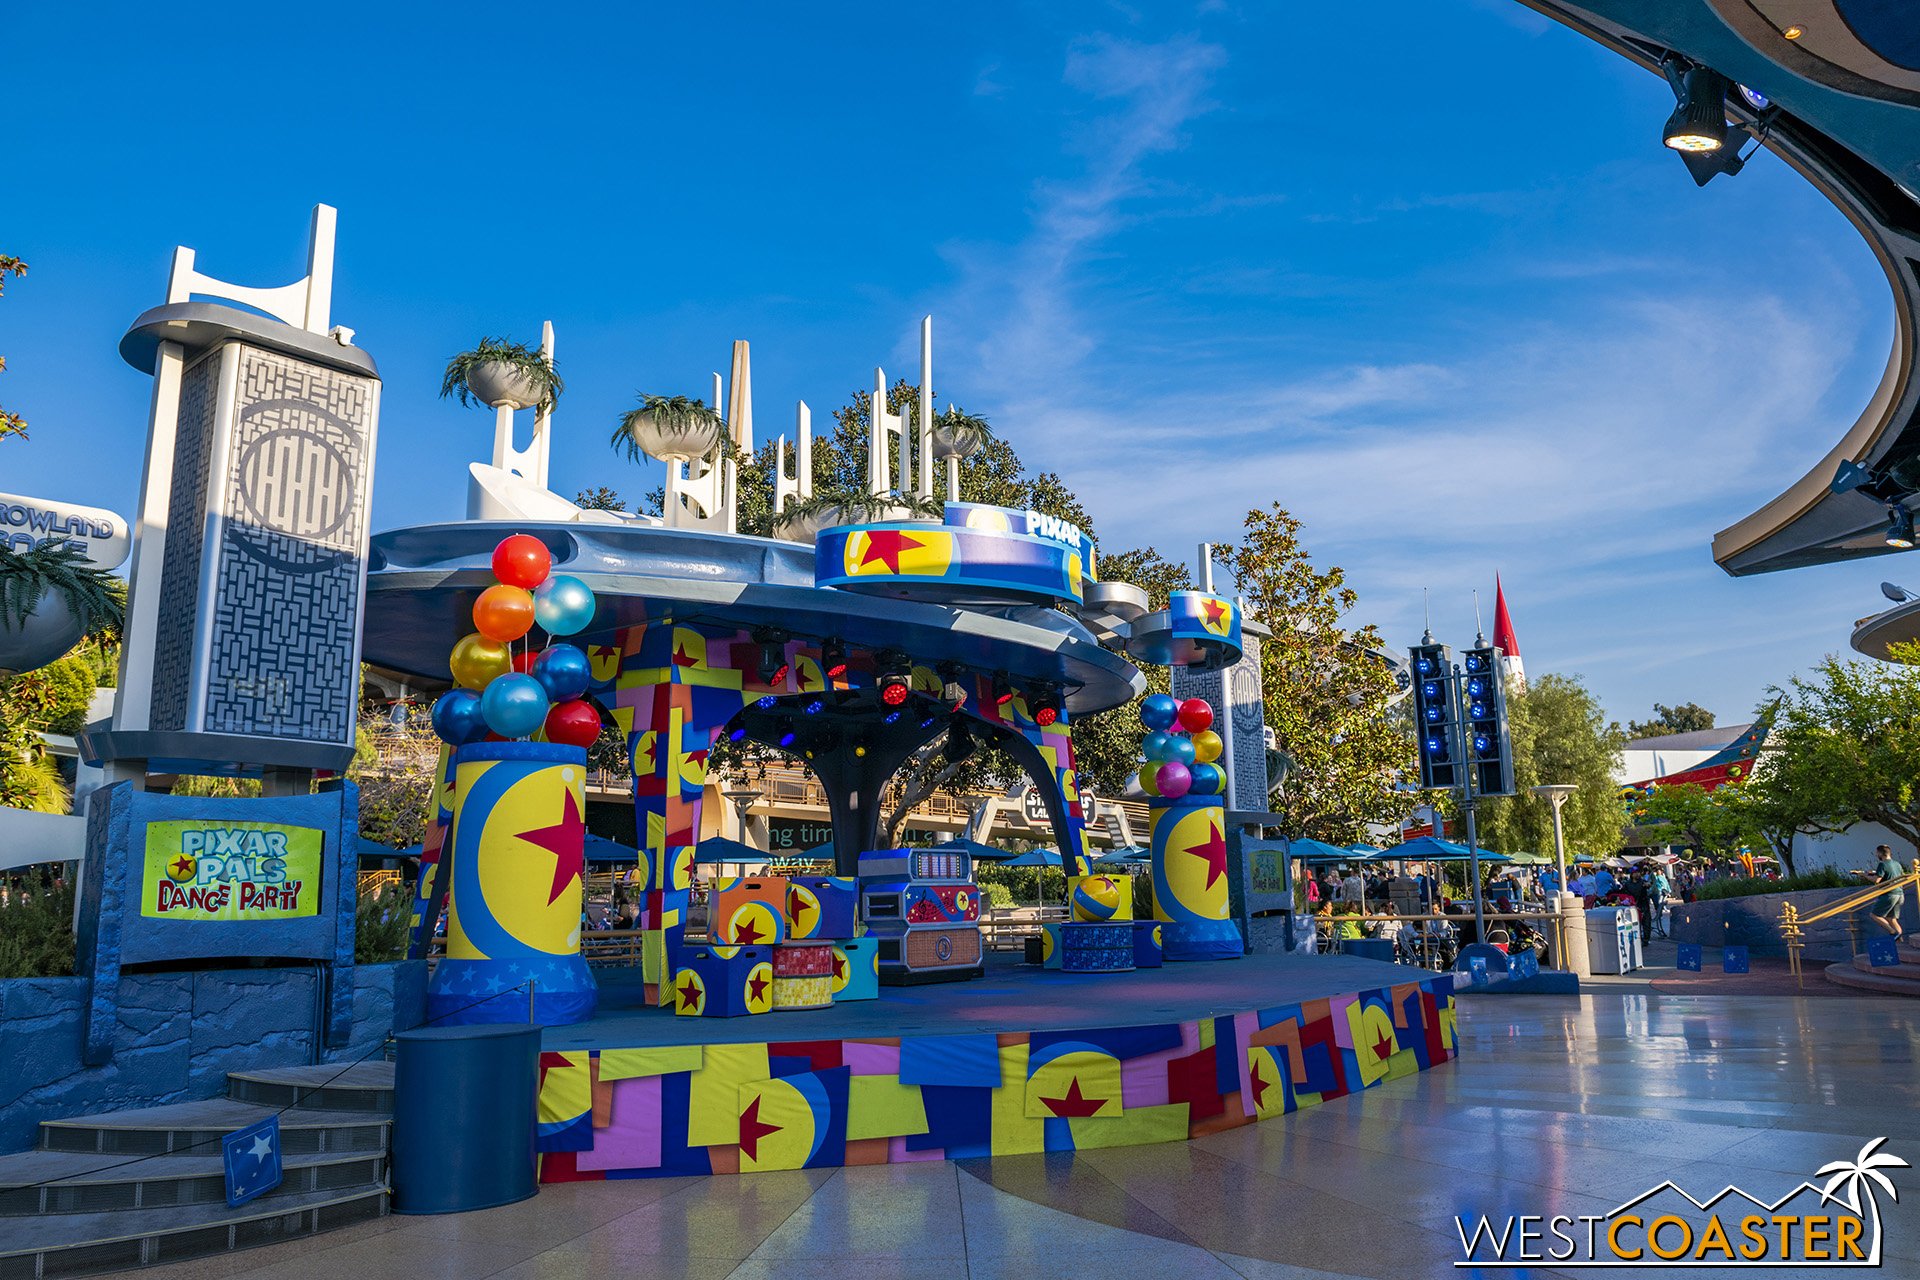  Not new news, but the Tomorrowland Terrace stage has been a Pixar dance party.  It’s very colorful! 